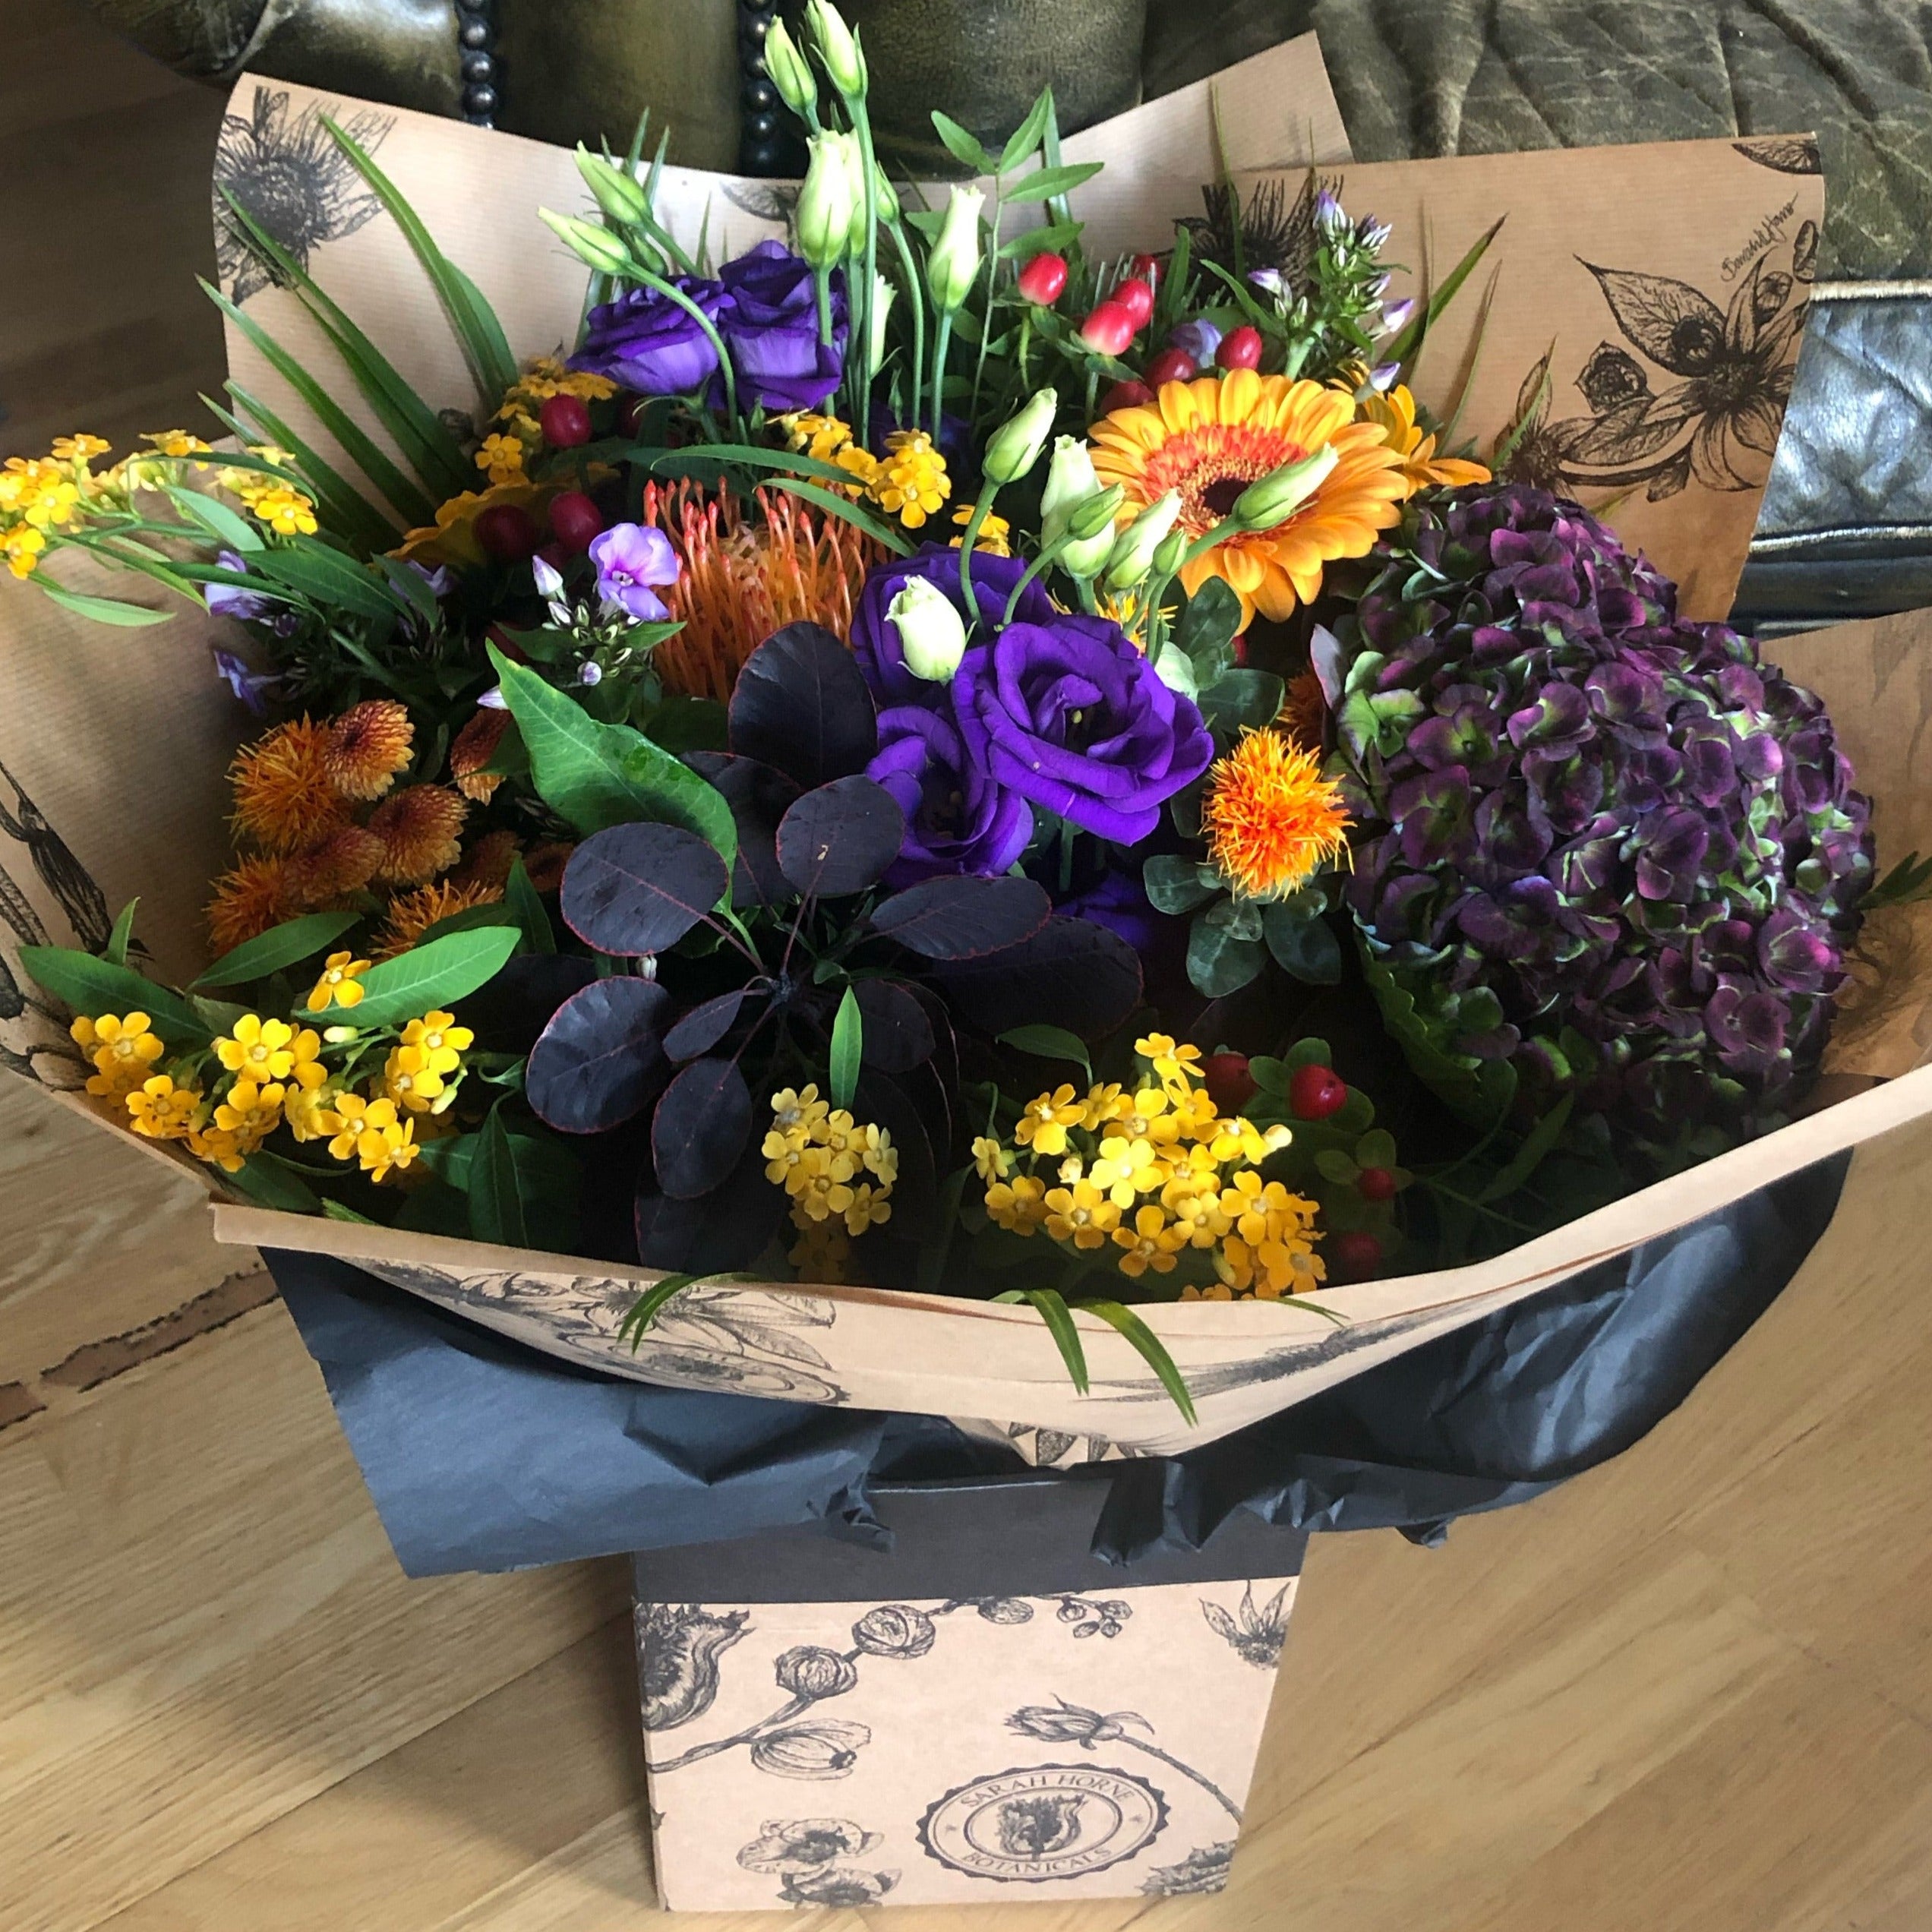 A beautiful bouquet of autumn blooms in golds, oranges and purple flowers